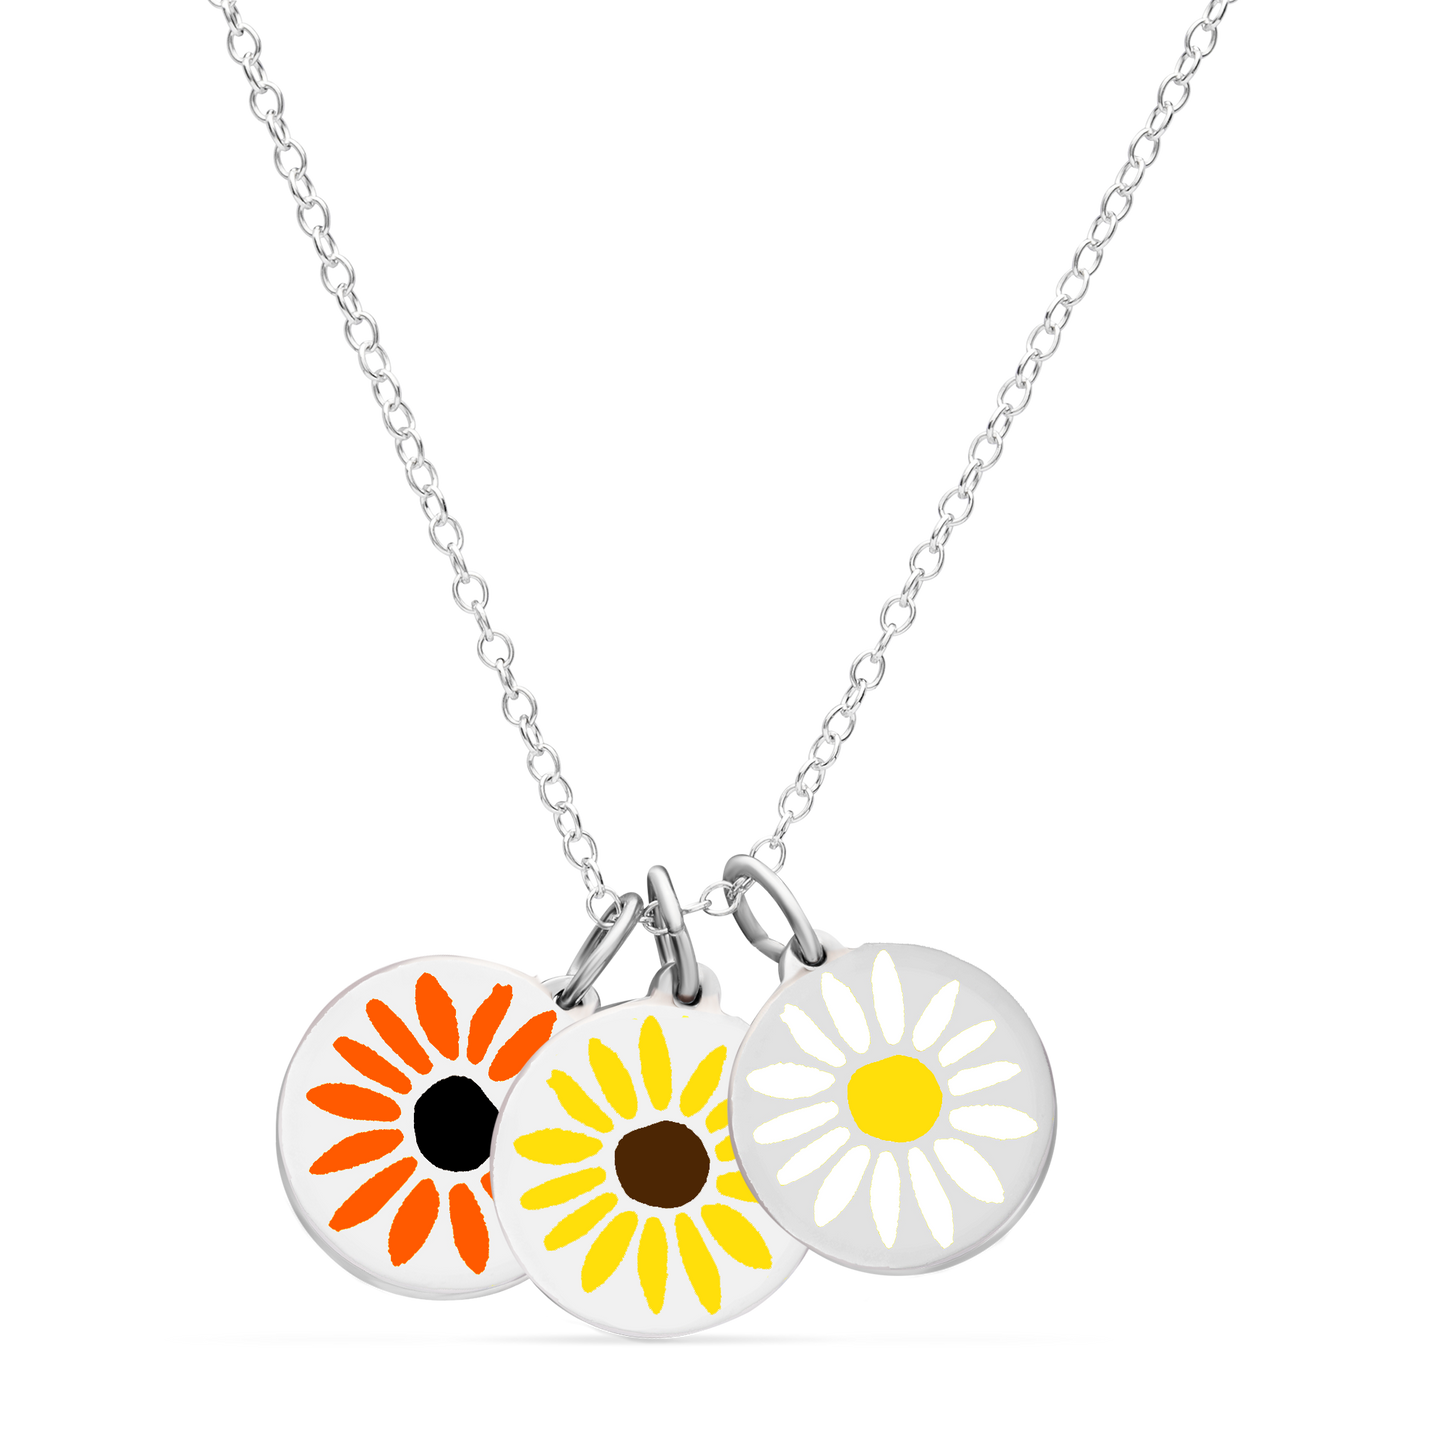 BOUQUET NECKLACE sterling silver with rhodium plate